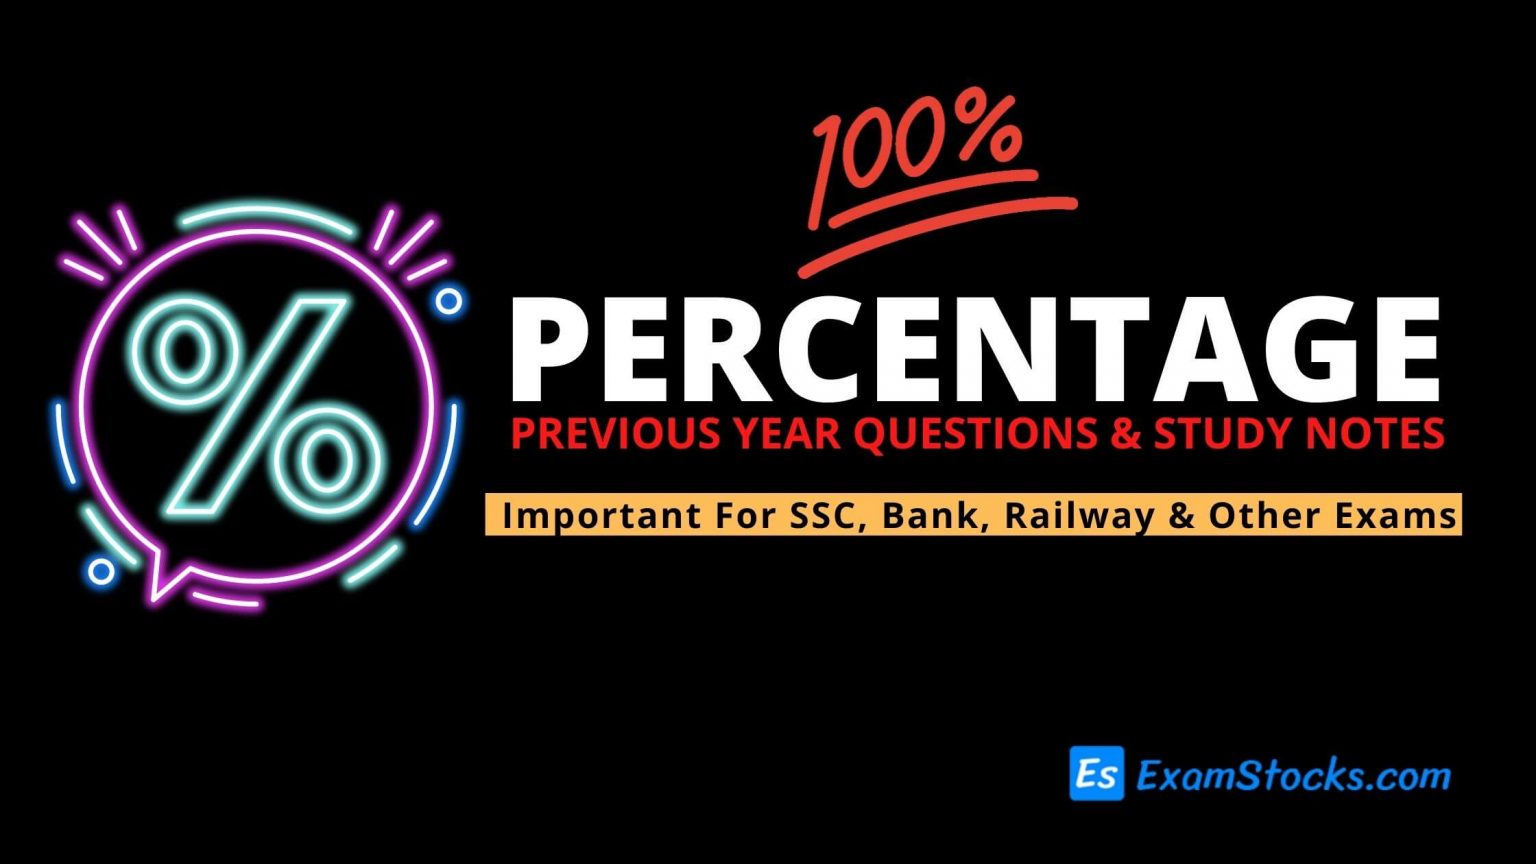 percentage-previous-year-questions-pdf-study-notes-exam-stocks